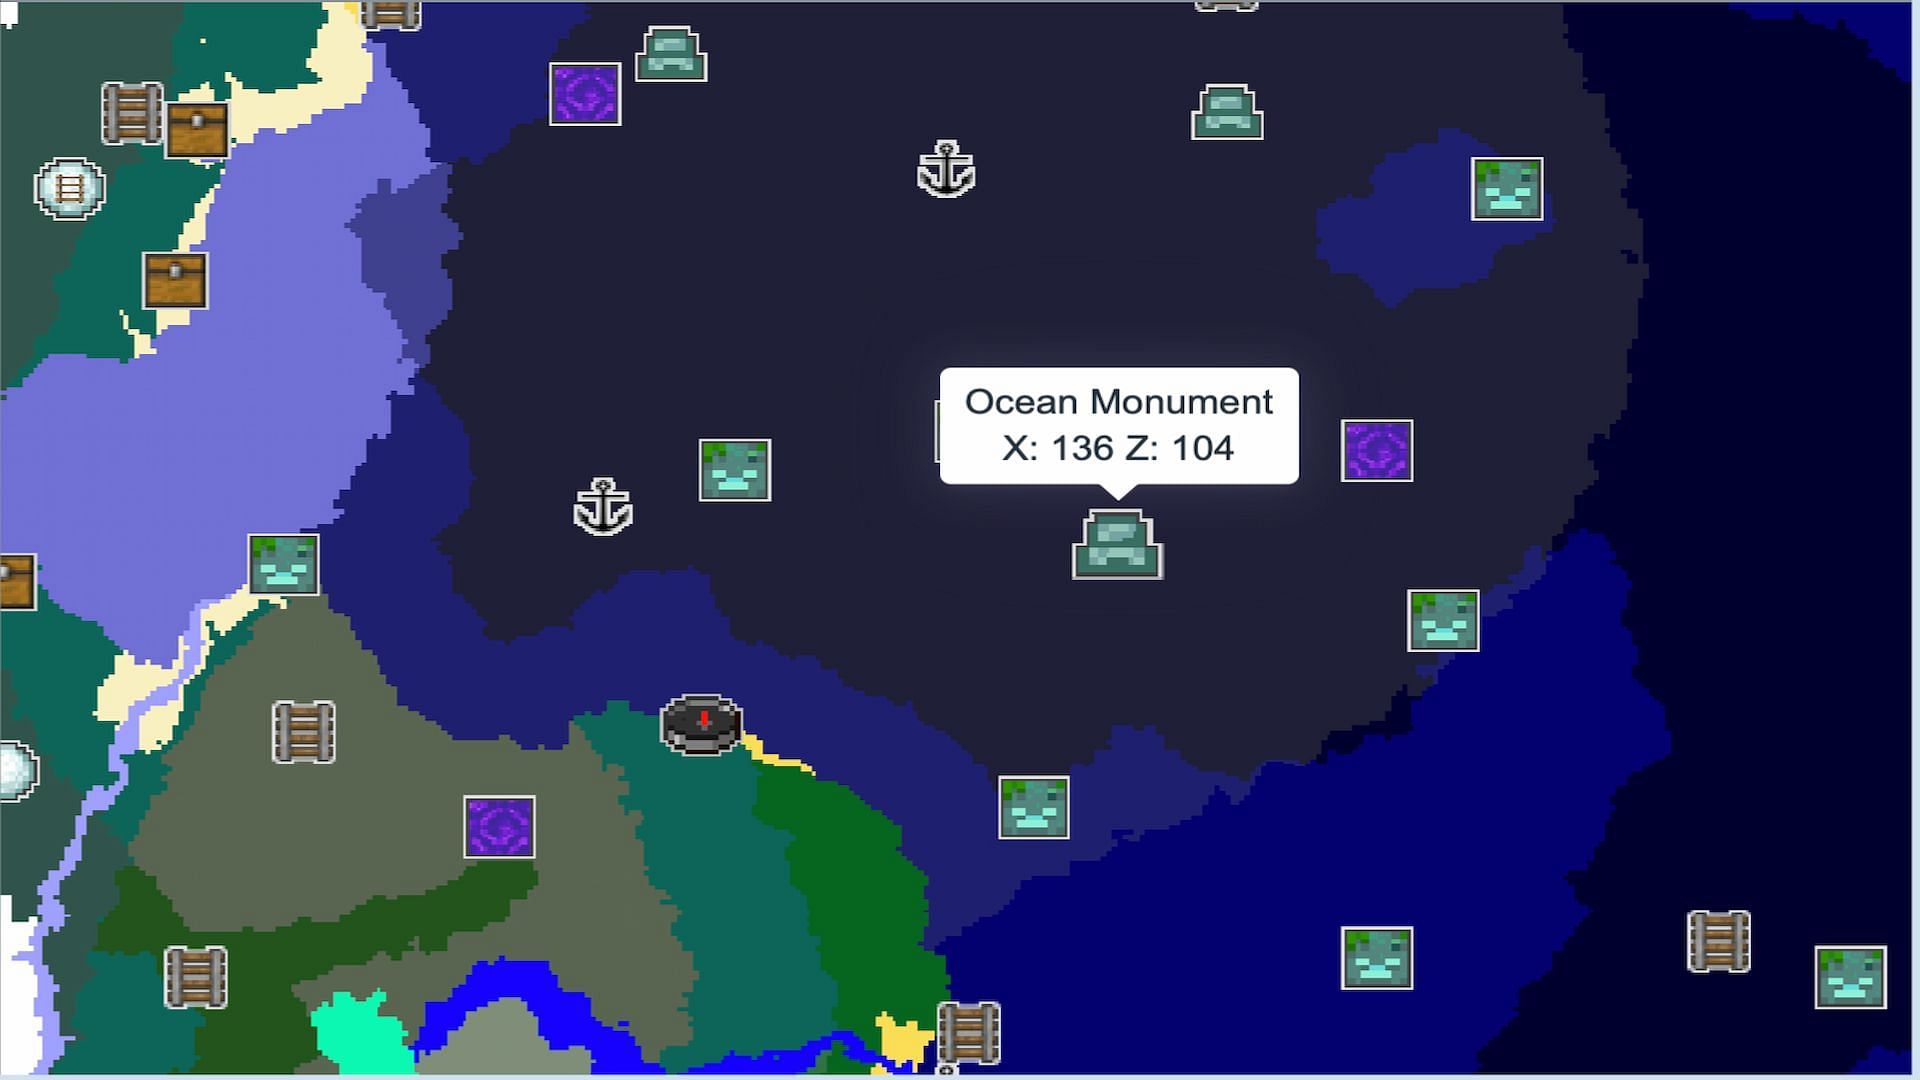 Minecraft players who use this seed can easily find an ocean monument right off the coast (Image via chunkbase.com)